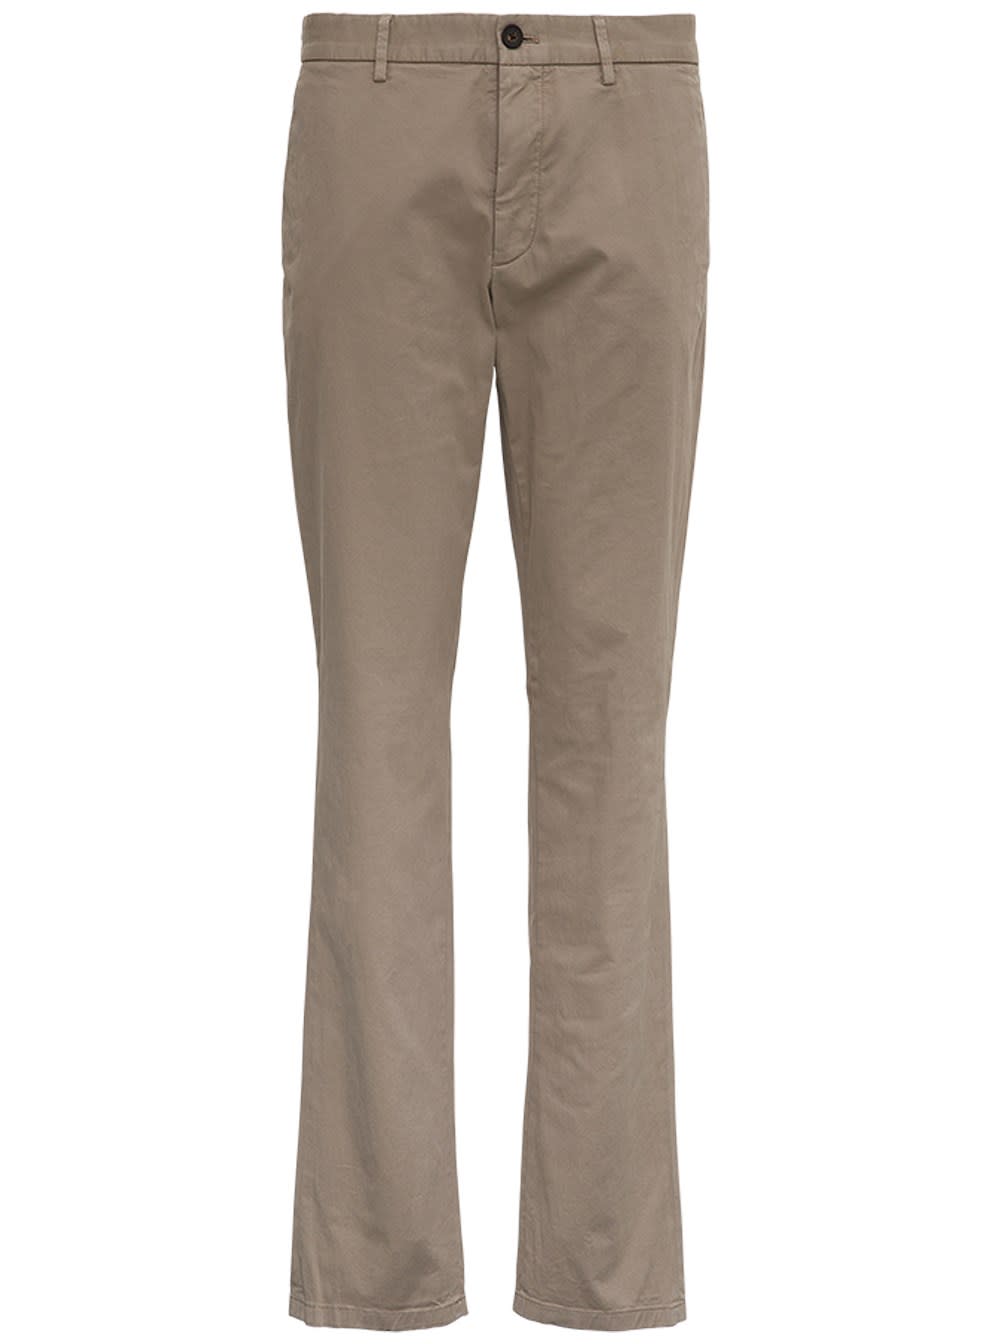 Z Zegna Beige Cotton Tailored Trousers